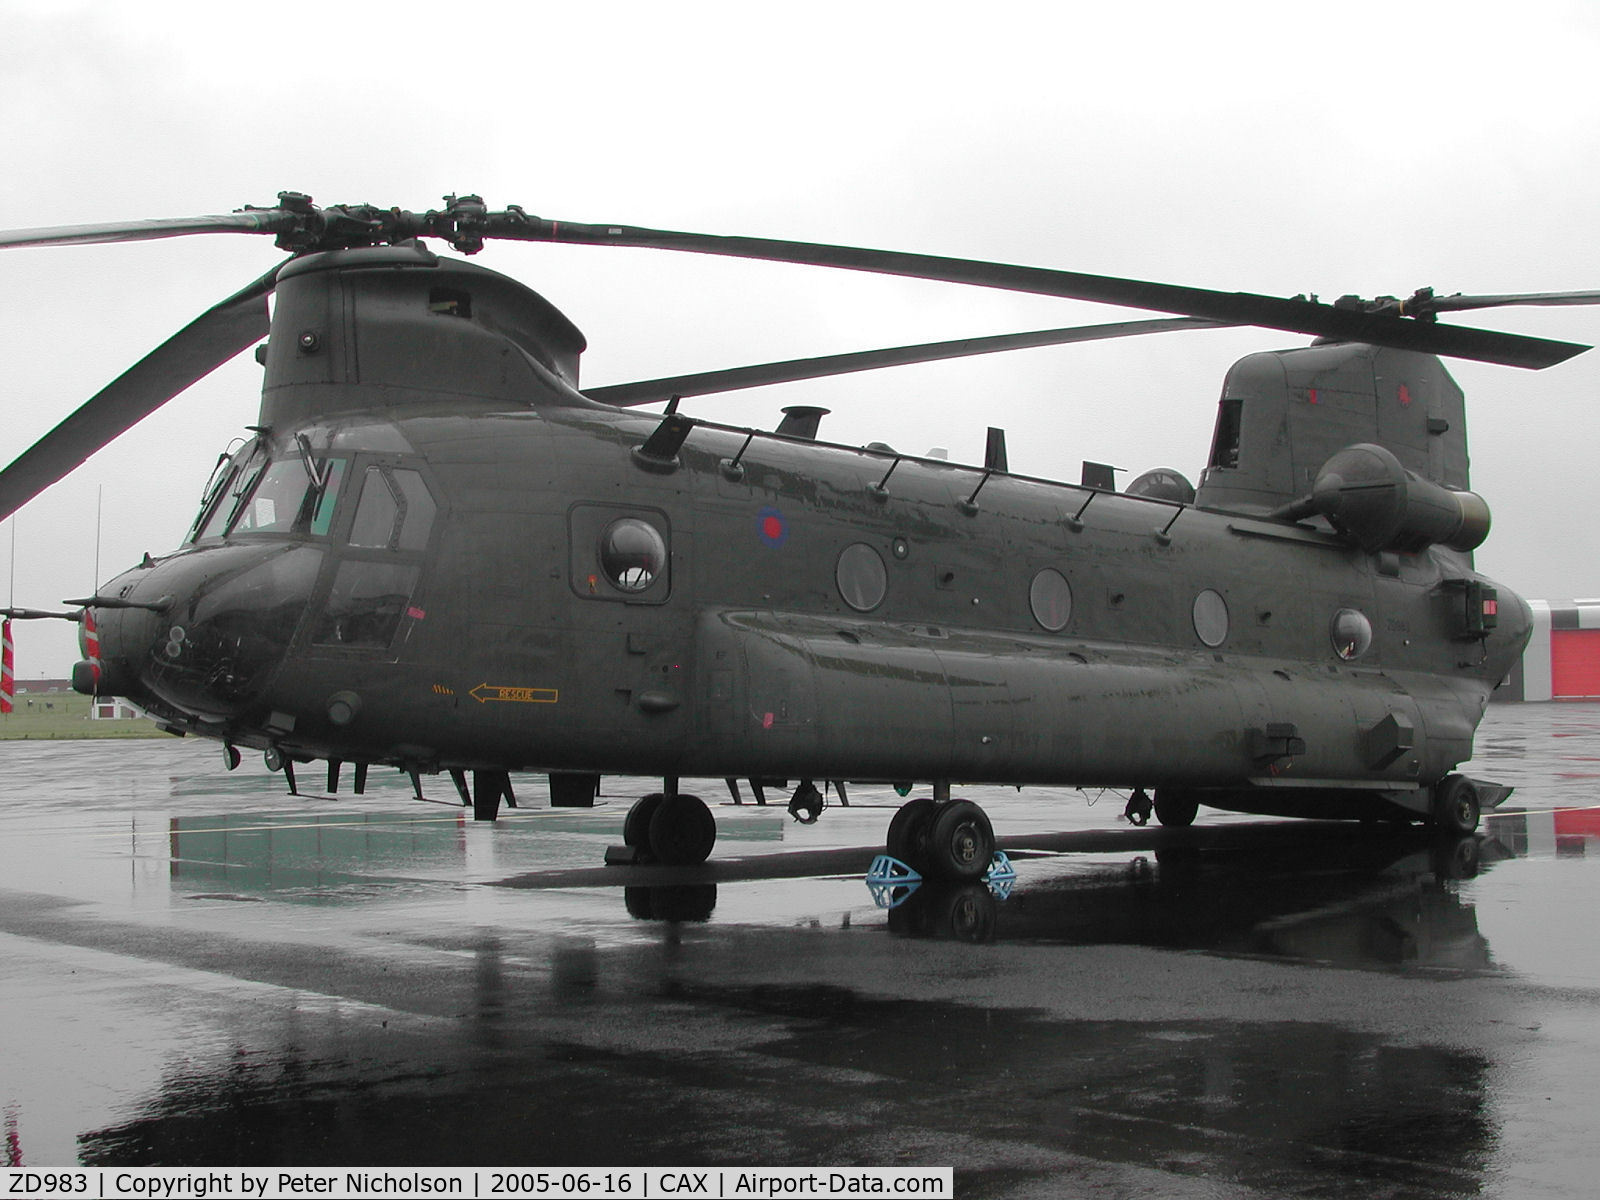 ZD983, Boeing Vertol Chinook HC.2 C/N M/A040/B-875/M7022, Chinook HC.2, callsign Lifter 1, of 18 Squadron as seen at Carlisle in the Summer of 2005.